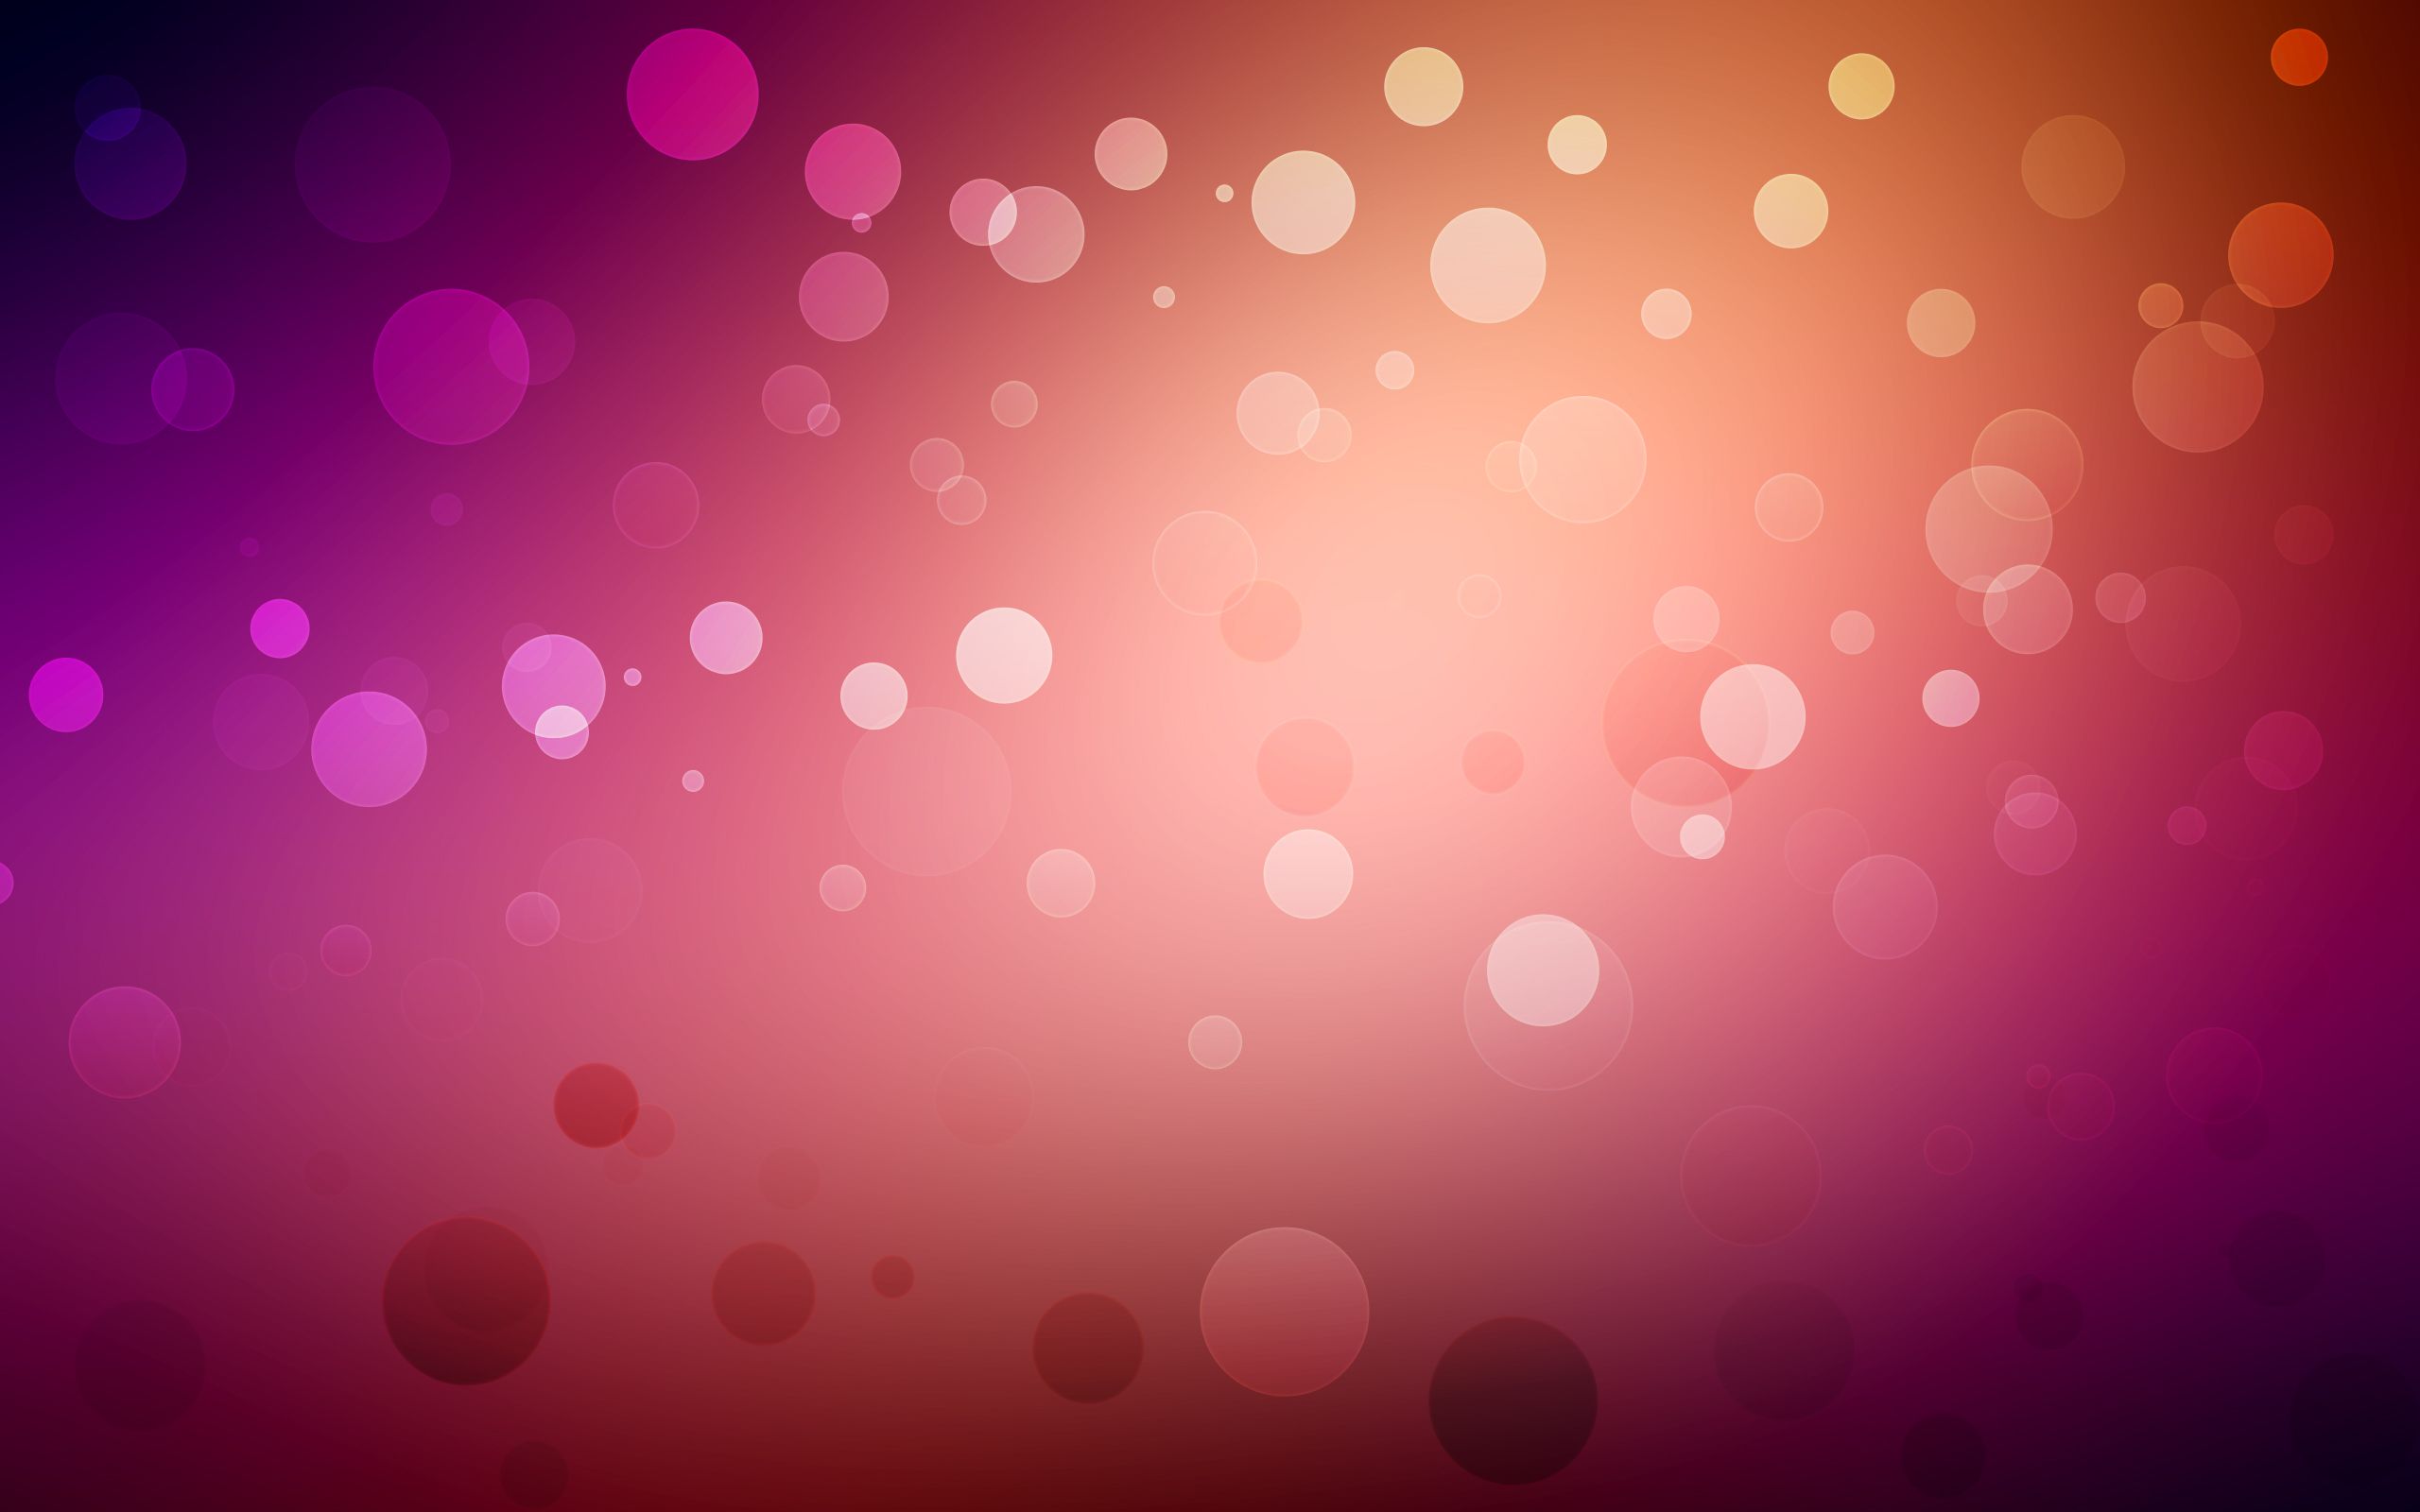 Abstract Purple and Red Dots - HD Backgrounds